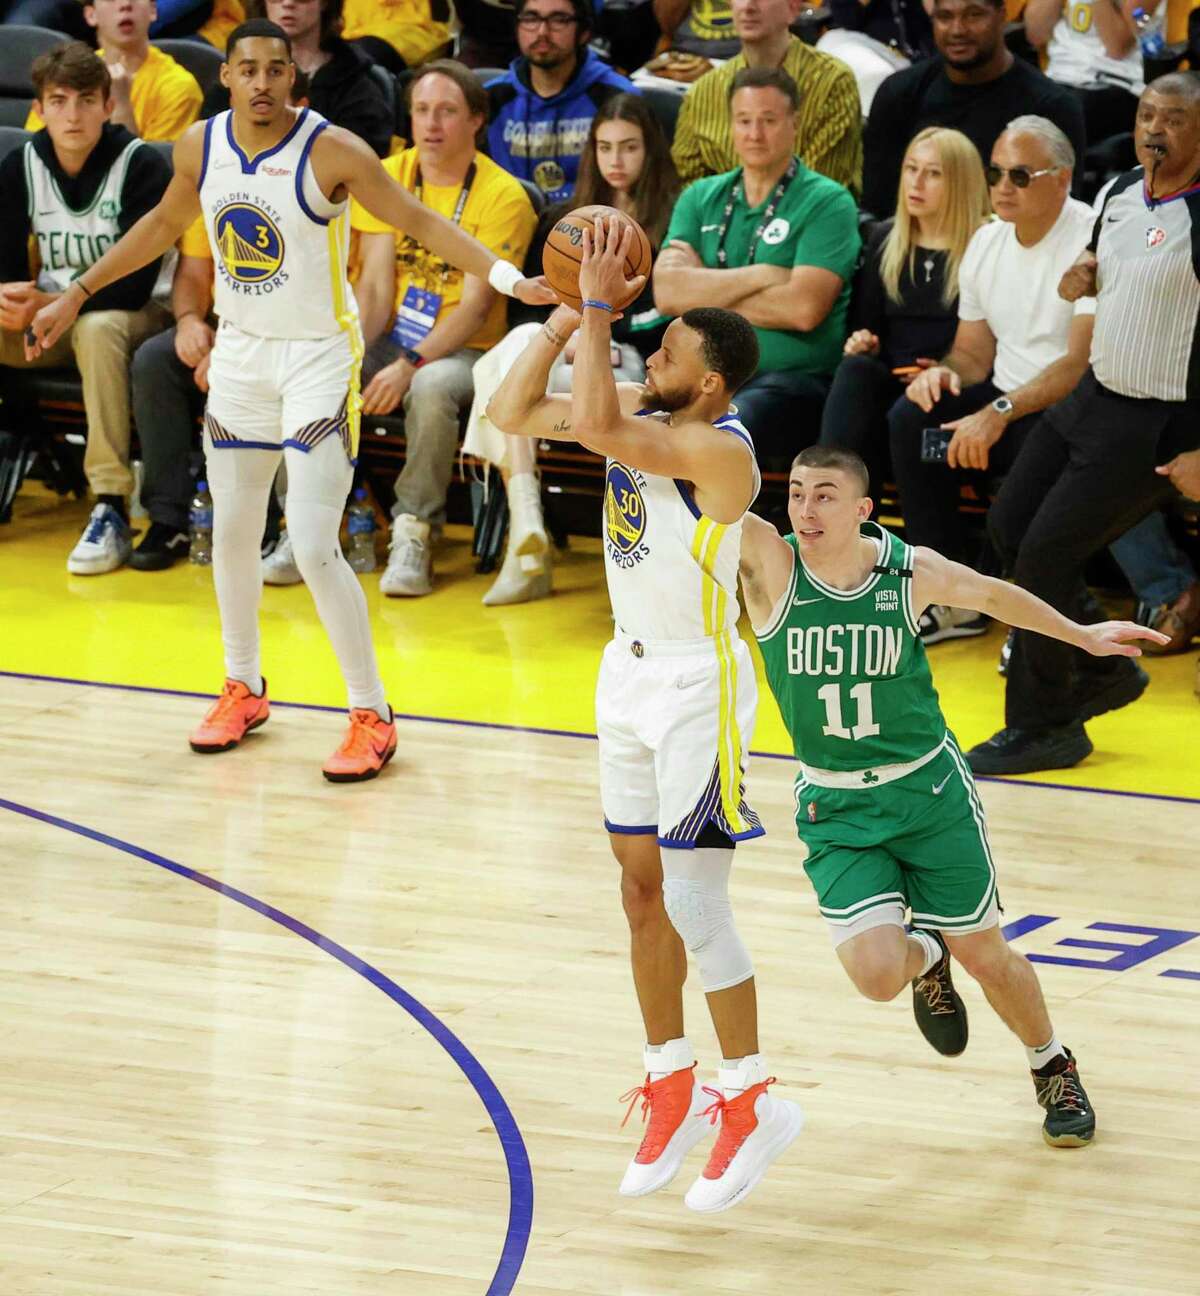 Golden State Warriors' Stephen Curry, 30, shoots a three pointer during the first quarter of the NBA Finals at Chase Center in San Francisco, Calif., on Sunday, June 5, 2022.